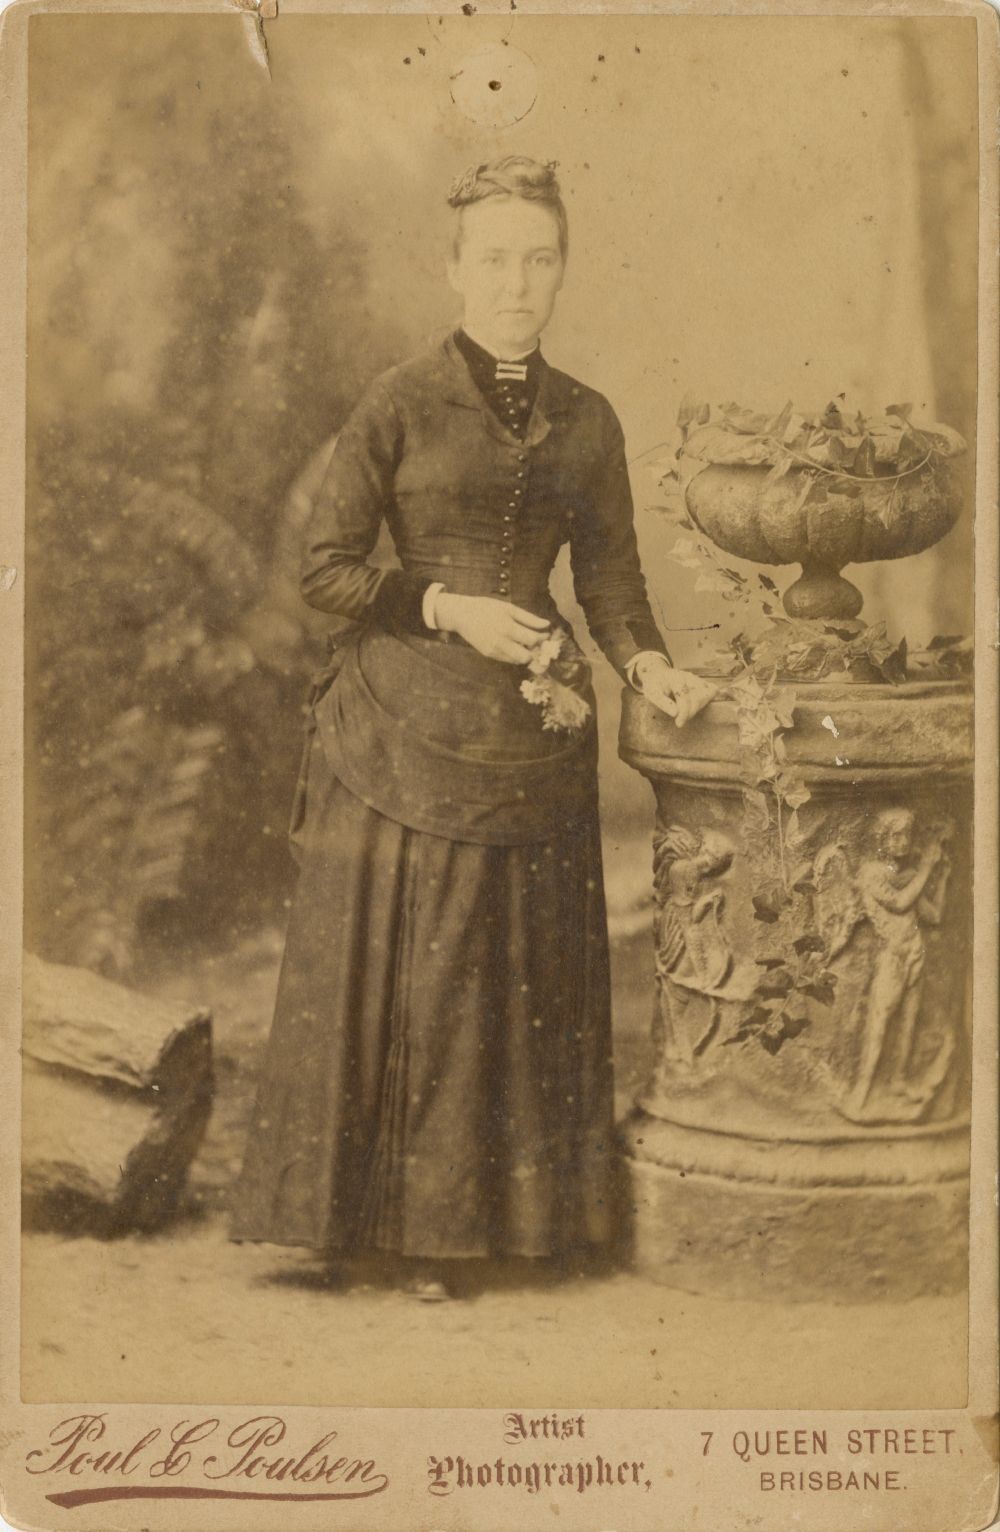 Sepia studio potrait of Polly Board wearing long sleeved ankle length dress